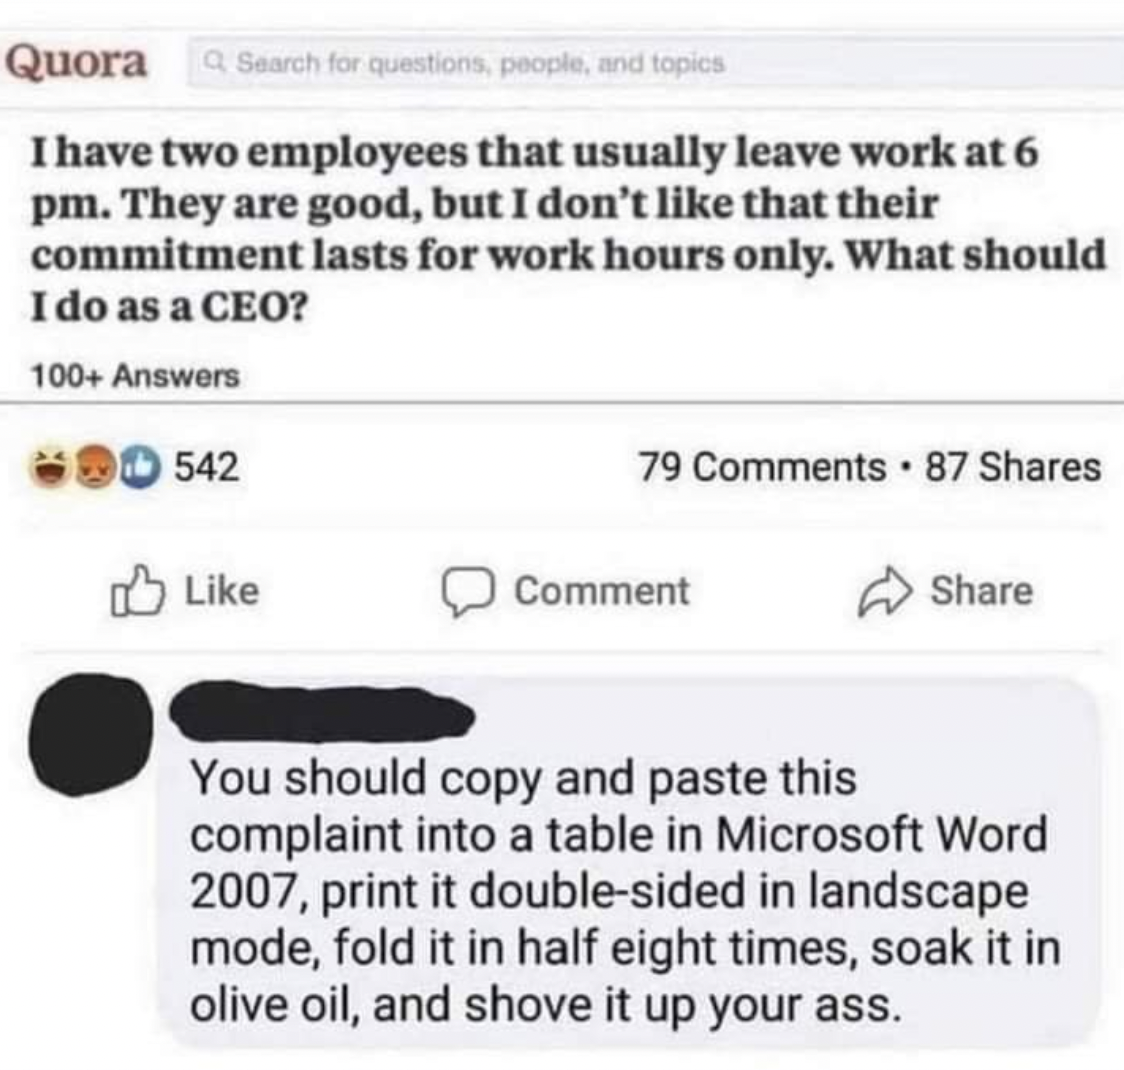 savage replies and comebacks - rare insults to use - Quora Search for questions, people, and topics I have two employees that usually leave work at 6 pm. They are good, but I don't that their commitment lasts for work hours only. What should I do as a Ceo